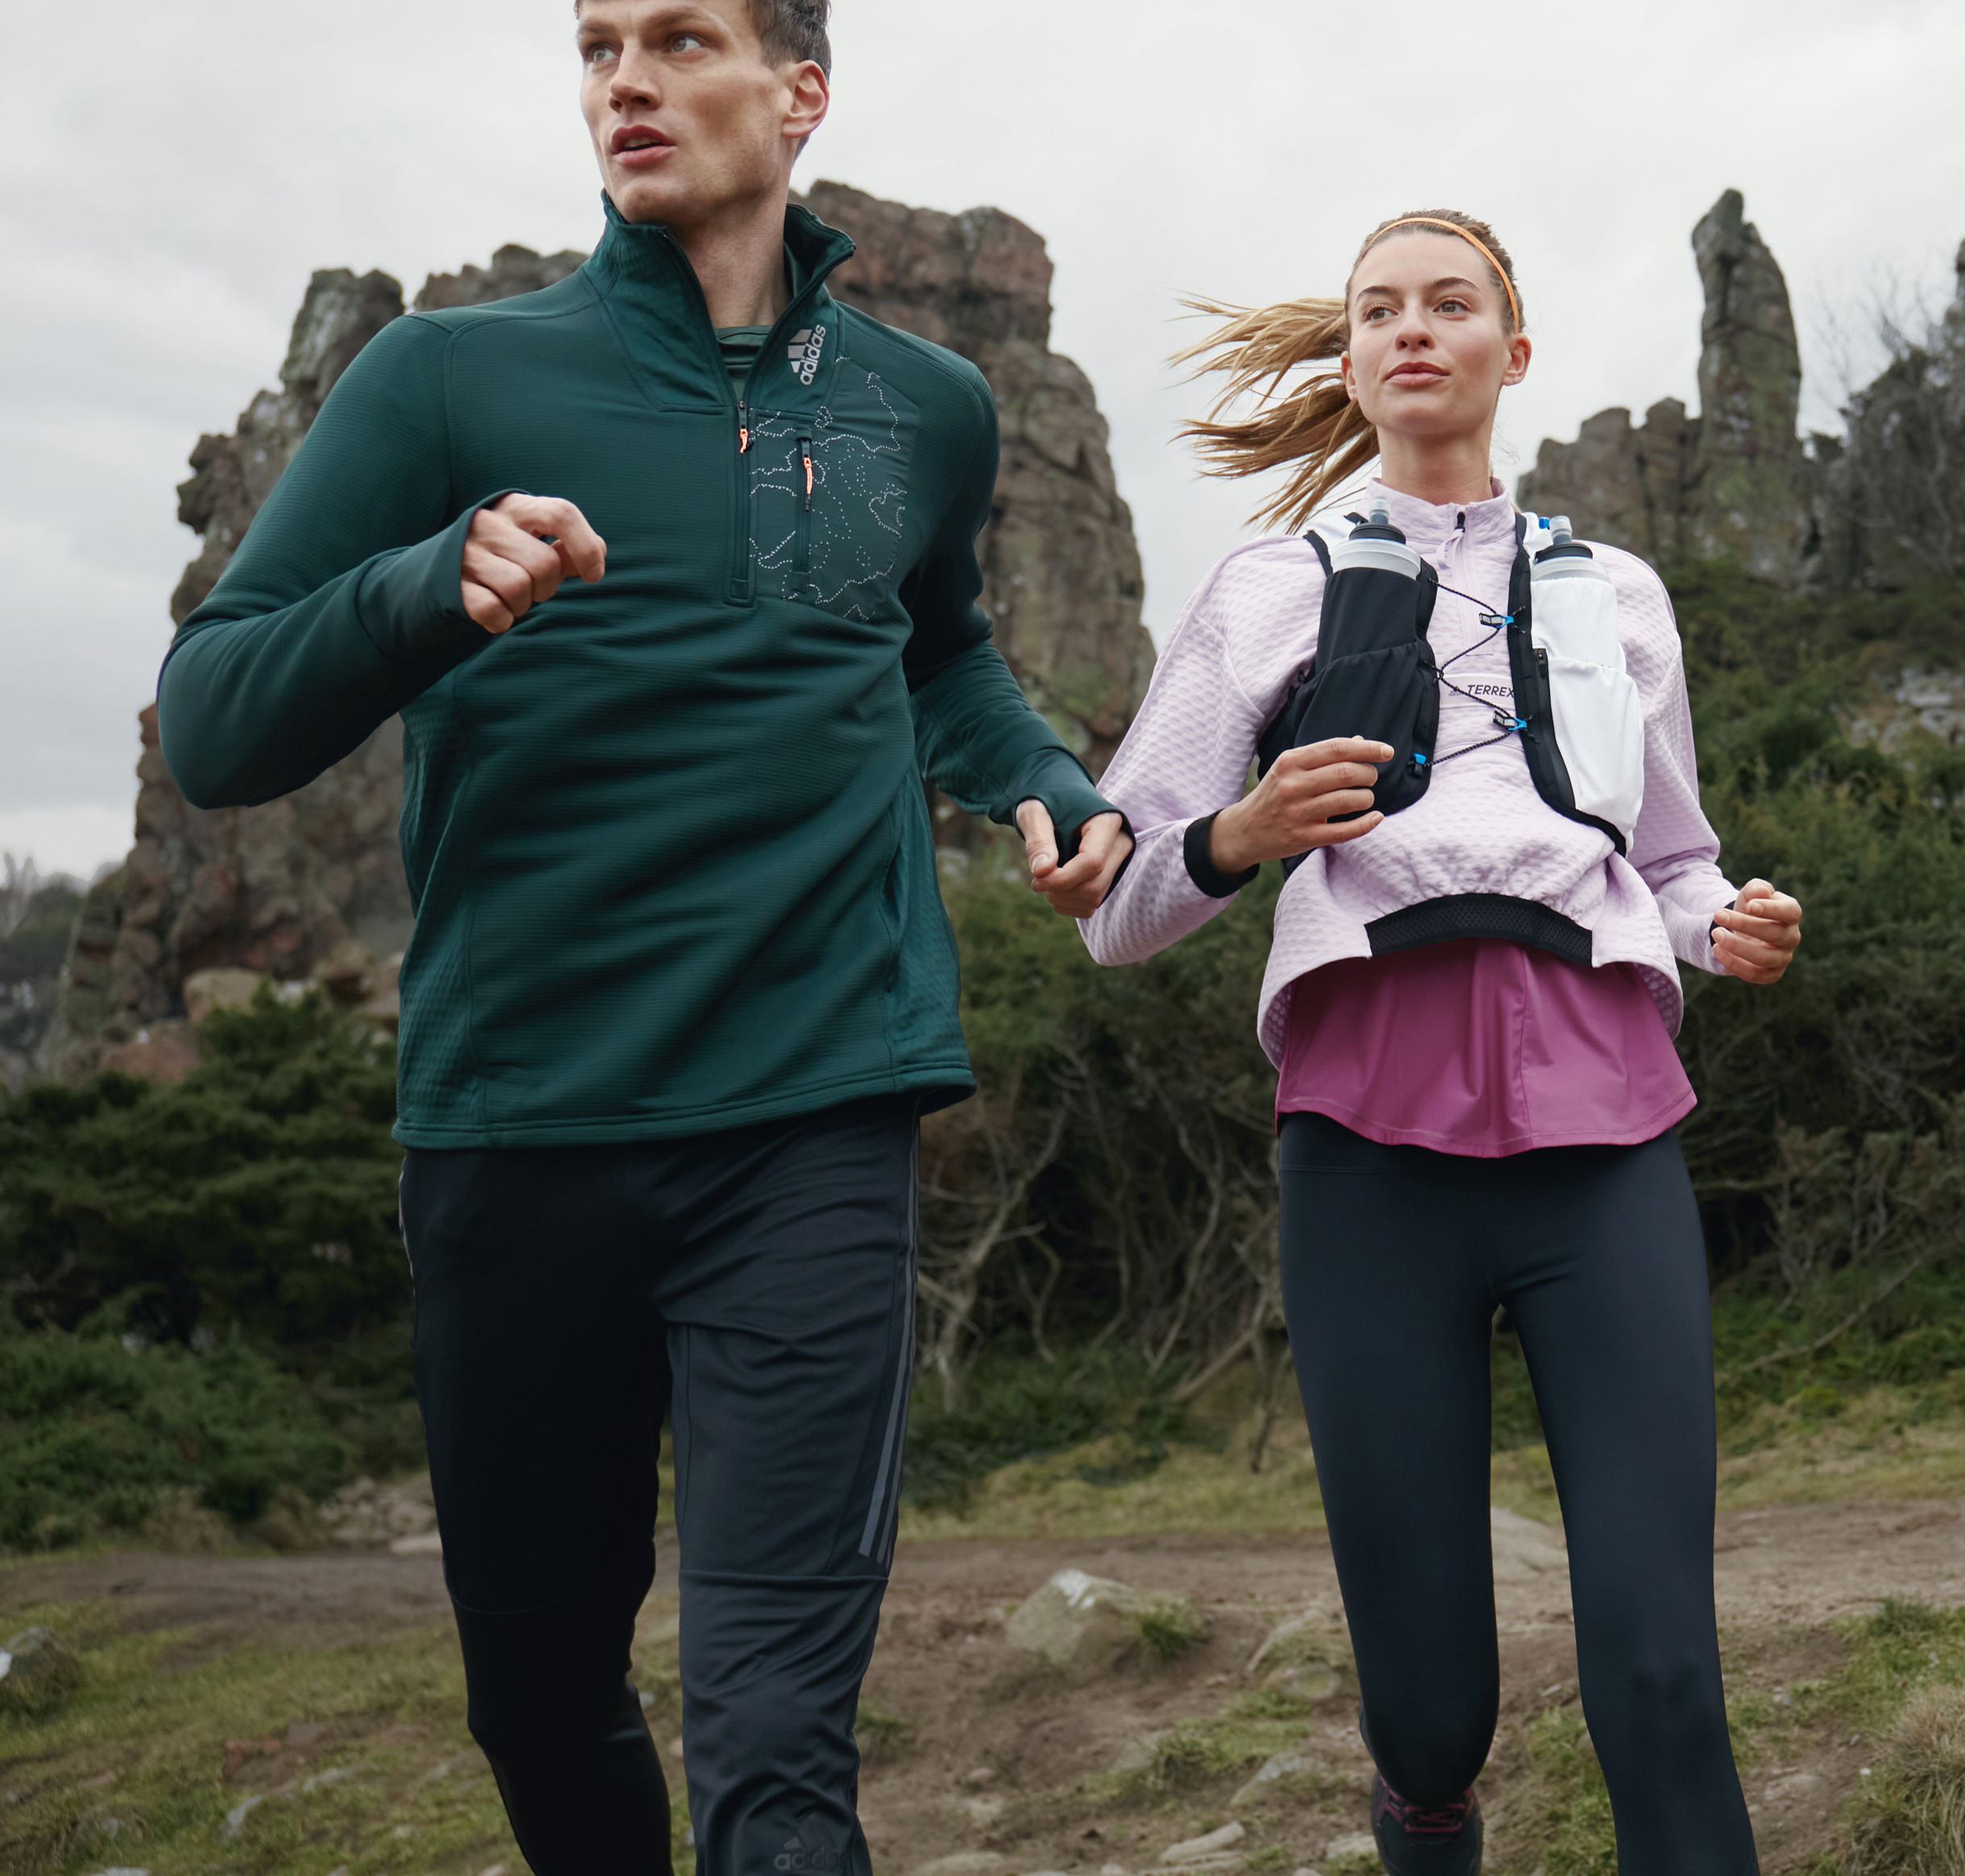 The autumn running guide – how to layer up when it gets cold